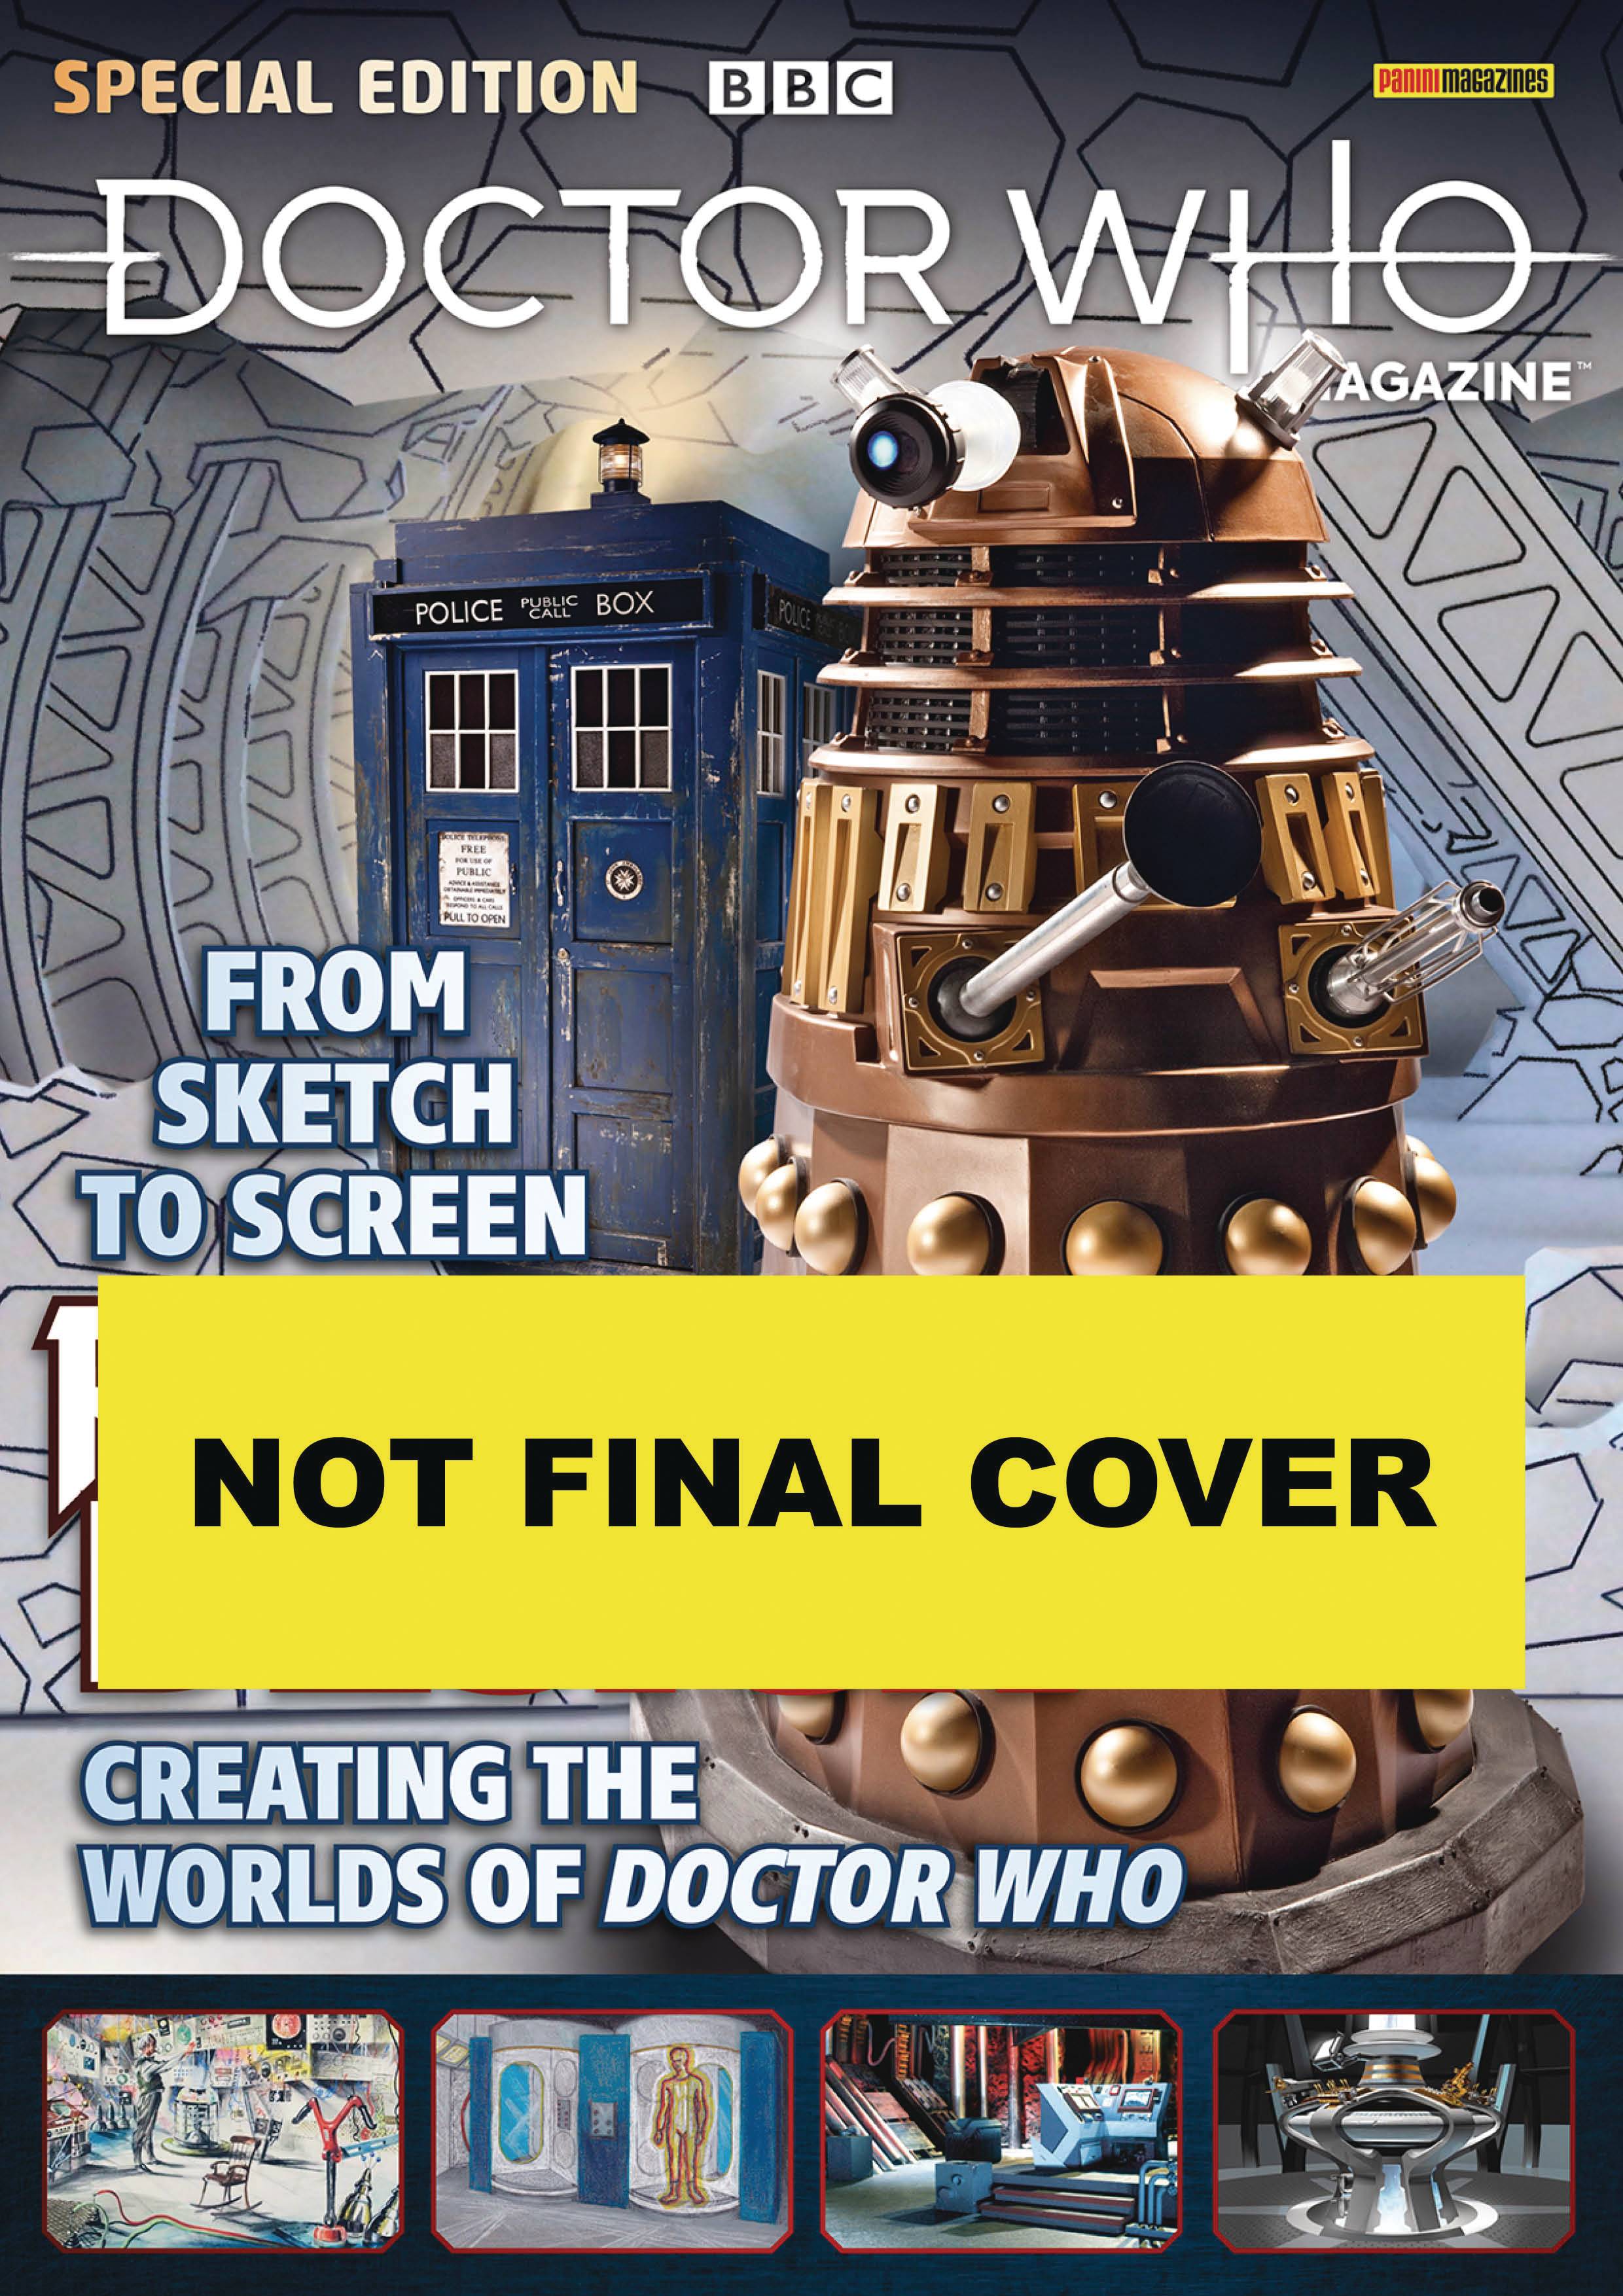 DOCTOR WHO MAGAZINE SPECIAL #58